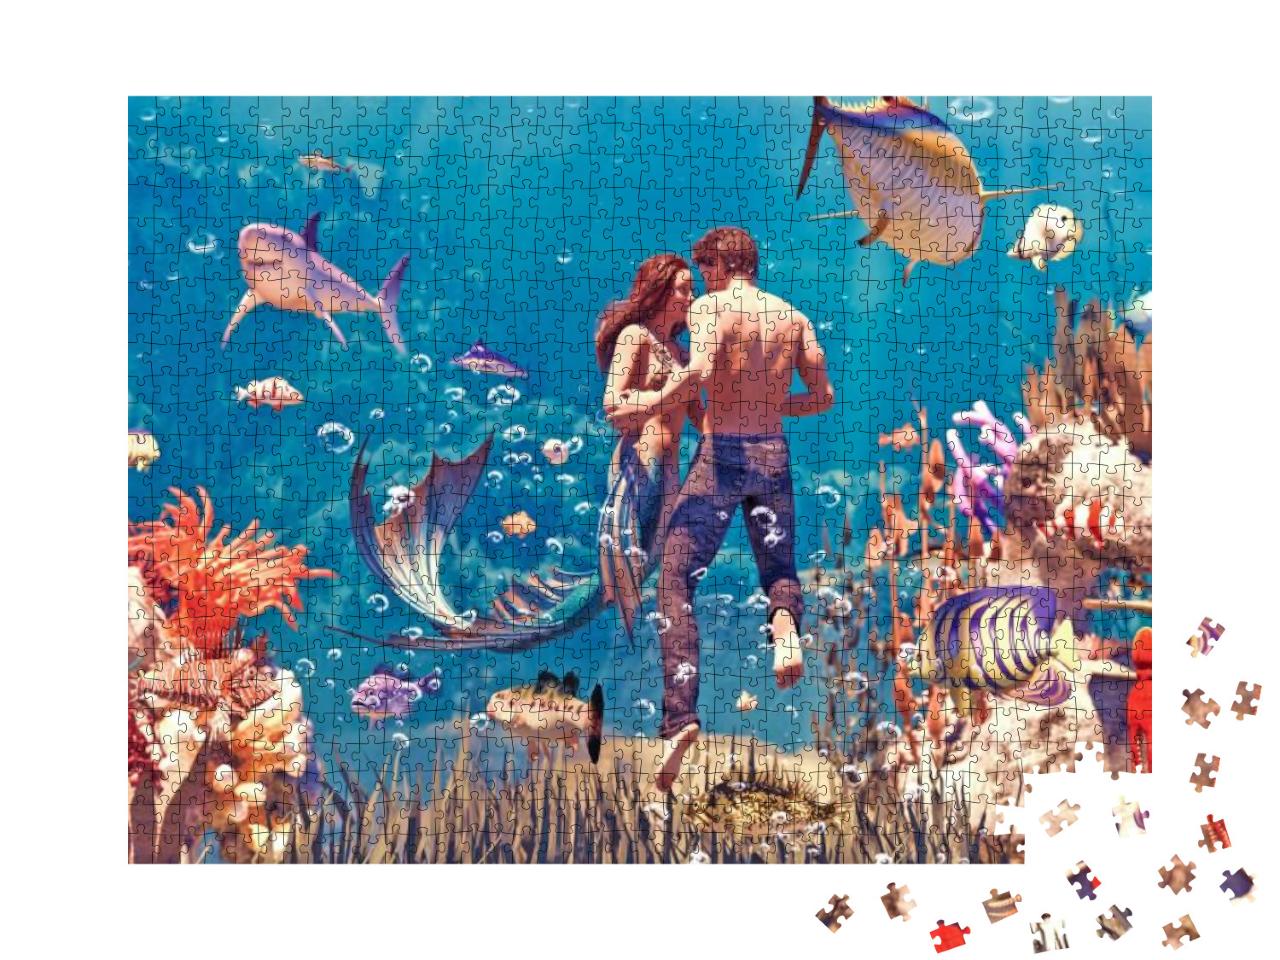 A Sea Love Story Between Man & a Mermaid, 3D Fantasy Merm... Jigsaw Puzzle with 1000 pieces